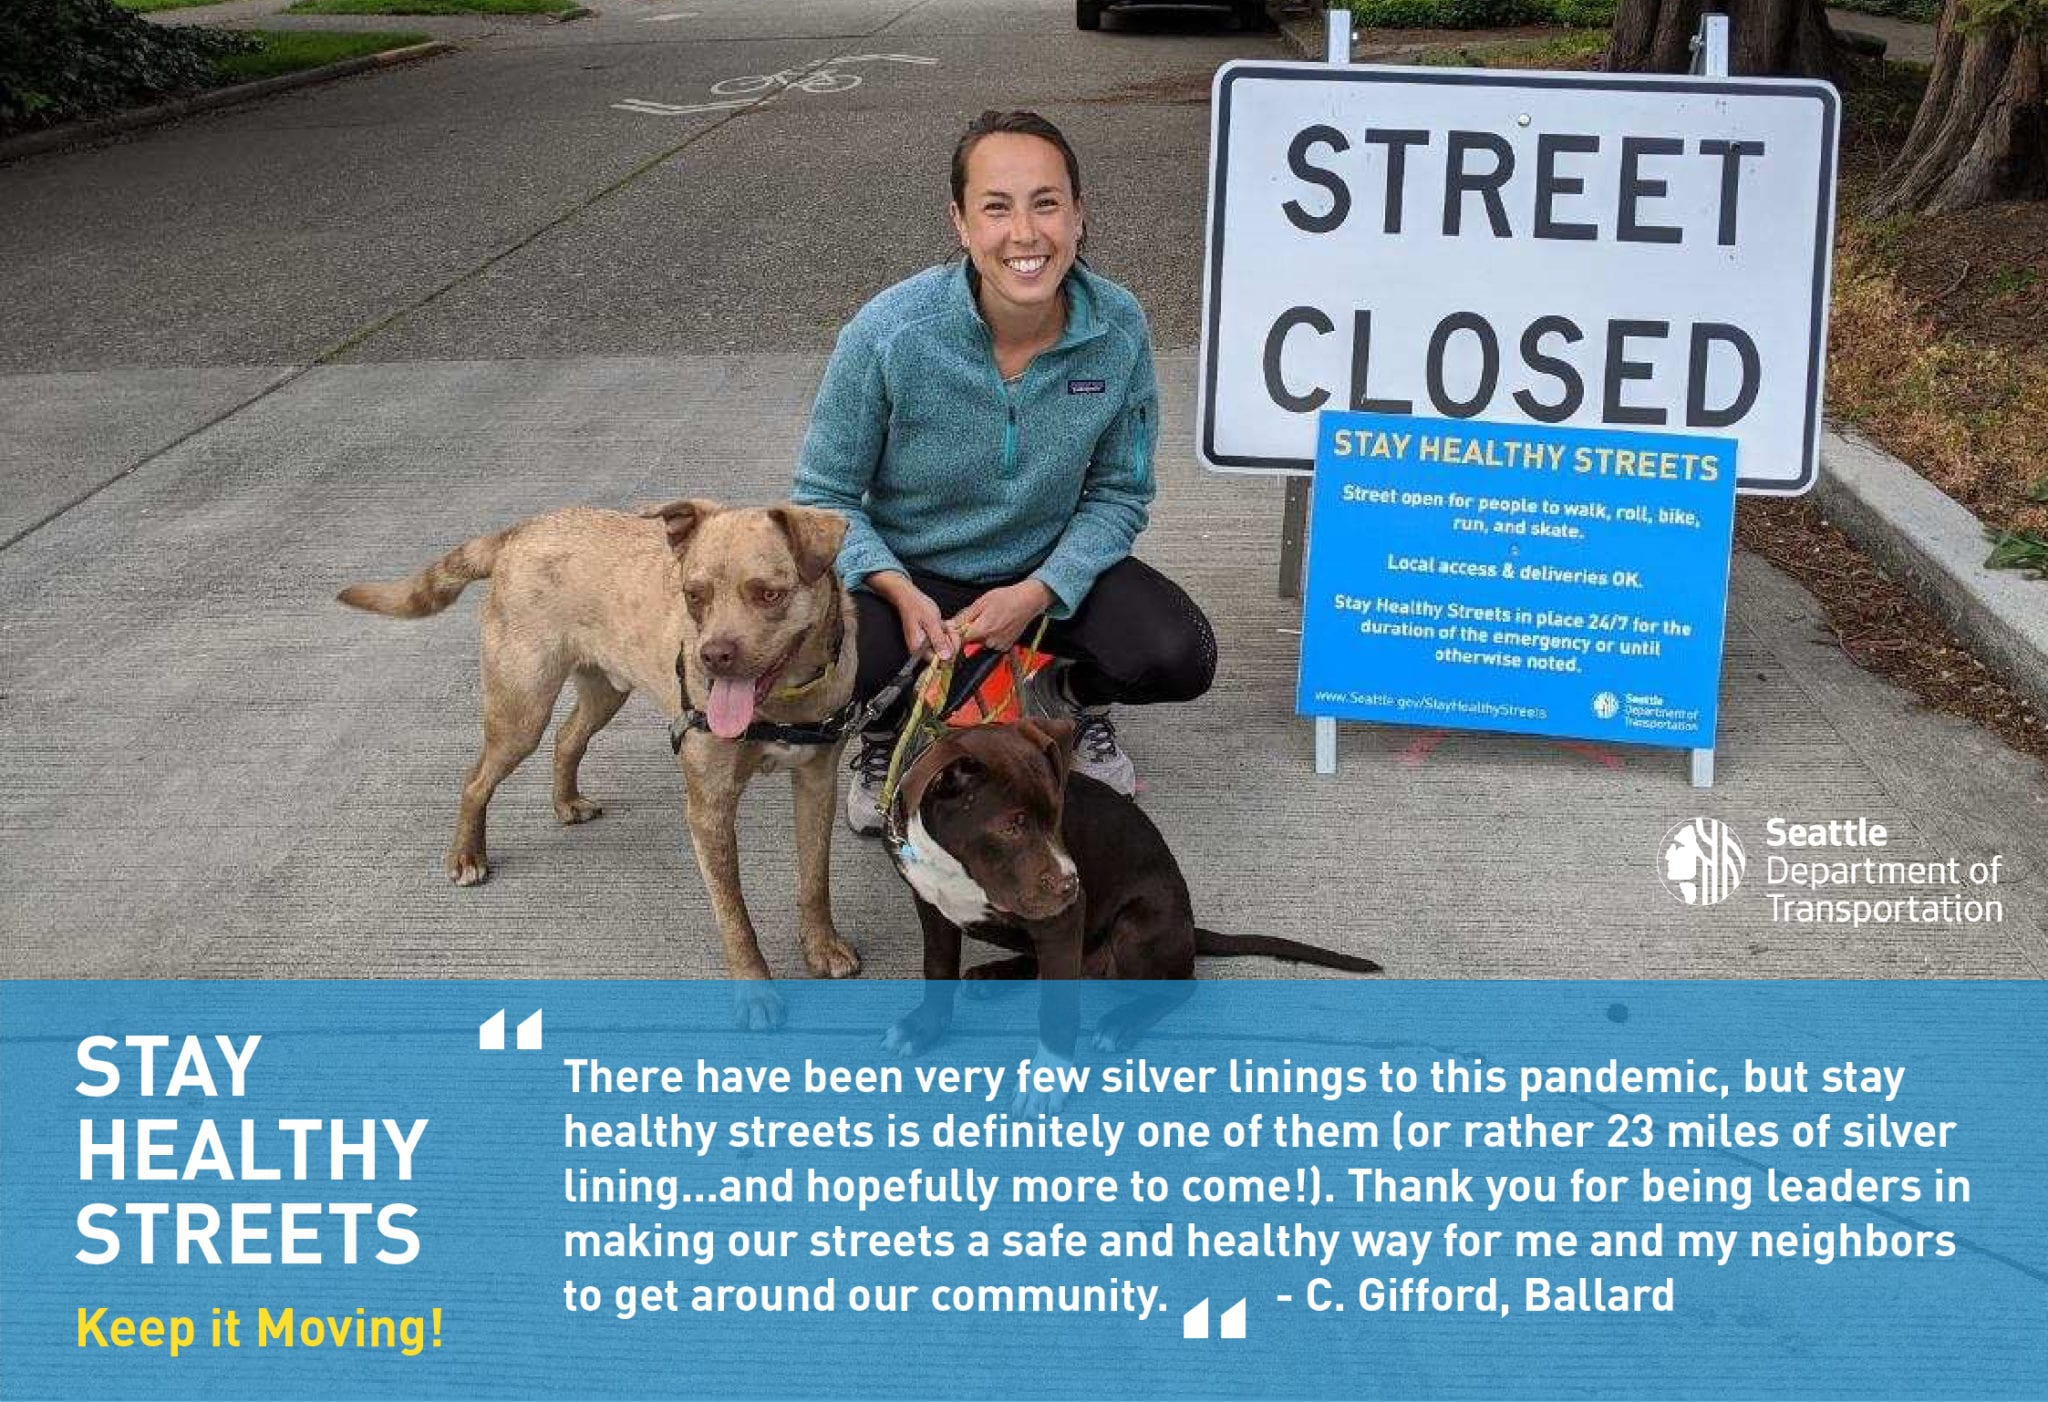 Photo of woman and dog near street closed sign. Quote says "there have been very few silver linings to this pandemic, but stay healthy streets is definitely one of them. Thank you for being leaders in making our streets a safe and healthy way for me an my neighbors to get around our community."